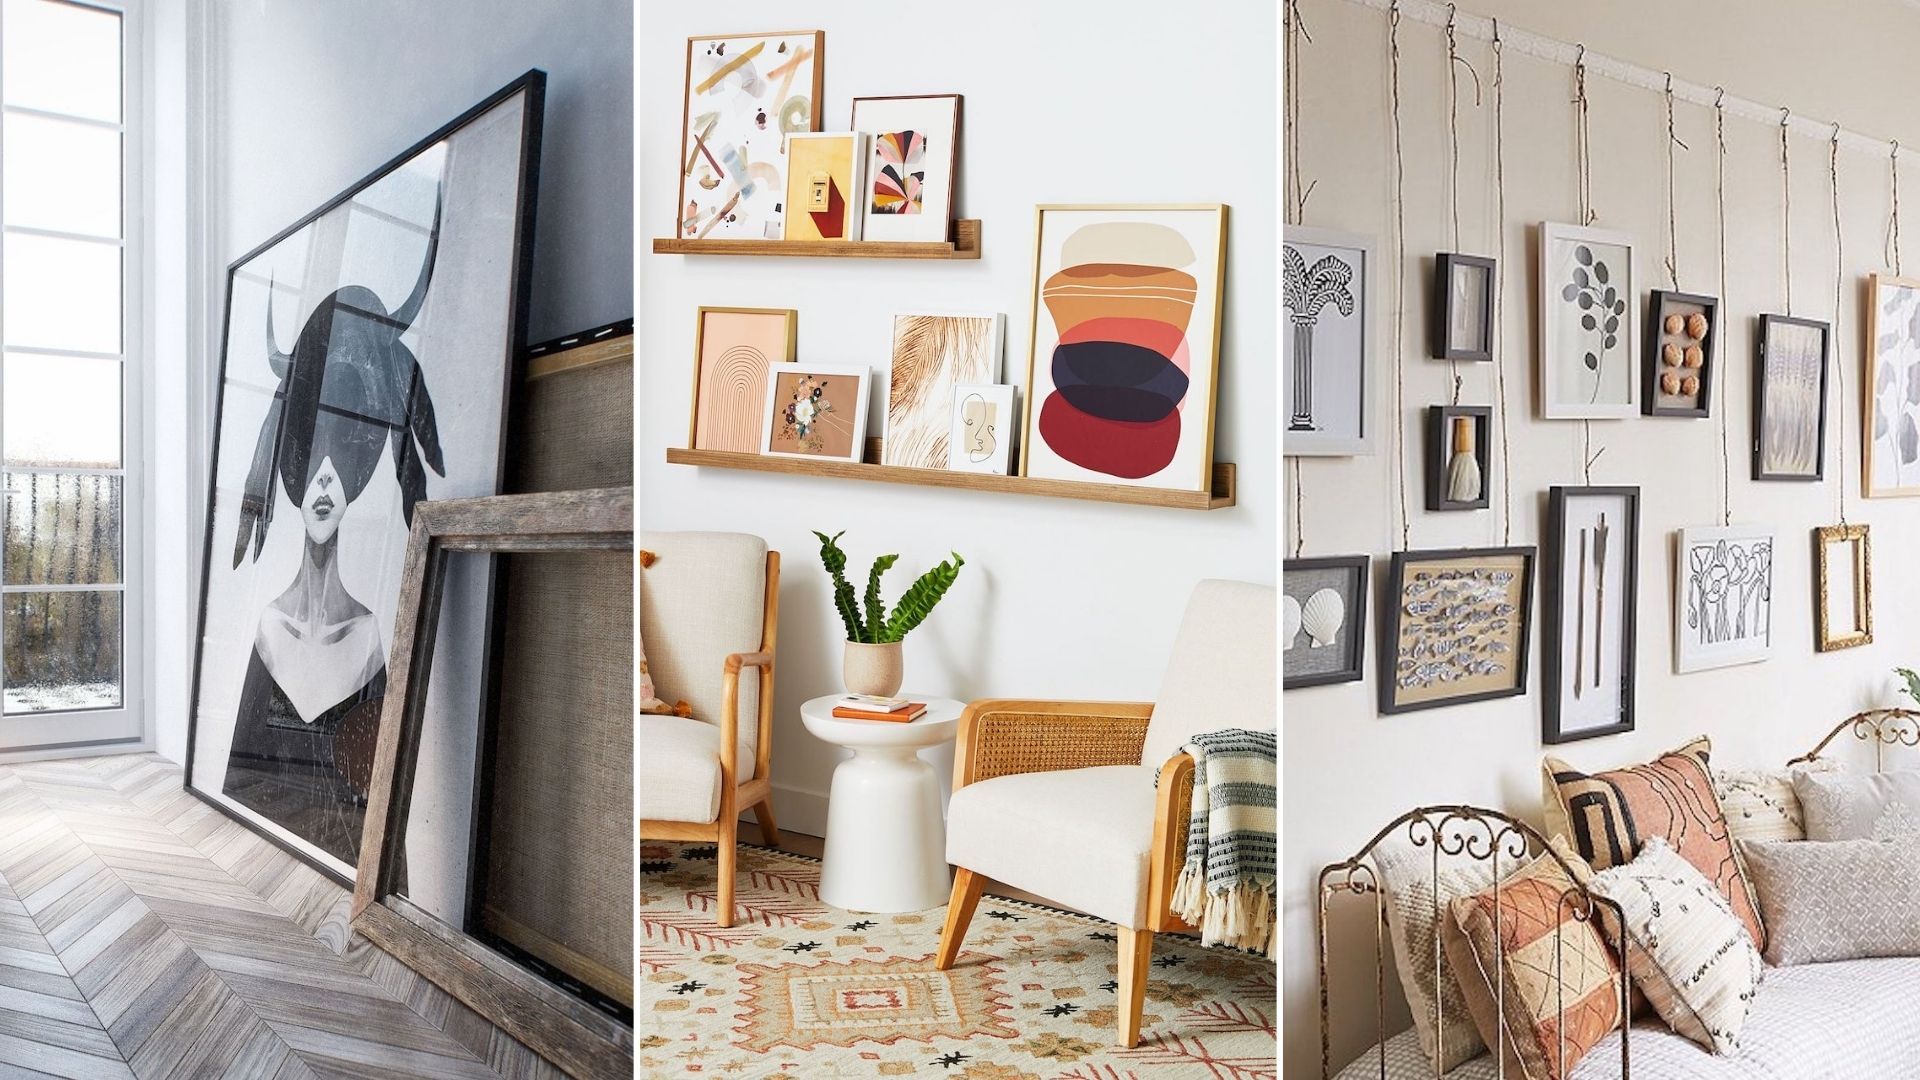 Beyond The Gallery Wall: 9 Innovative Ways to Display Wall Art